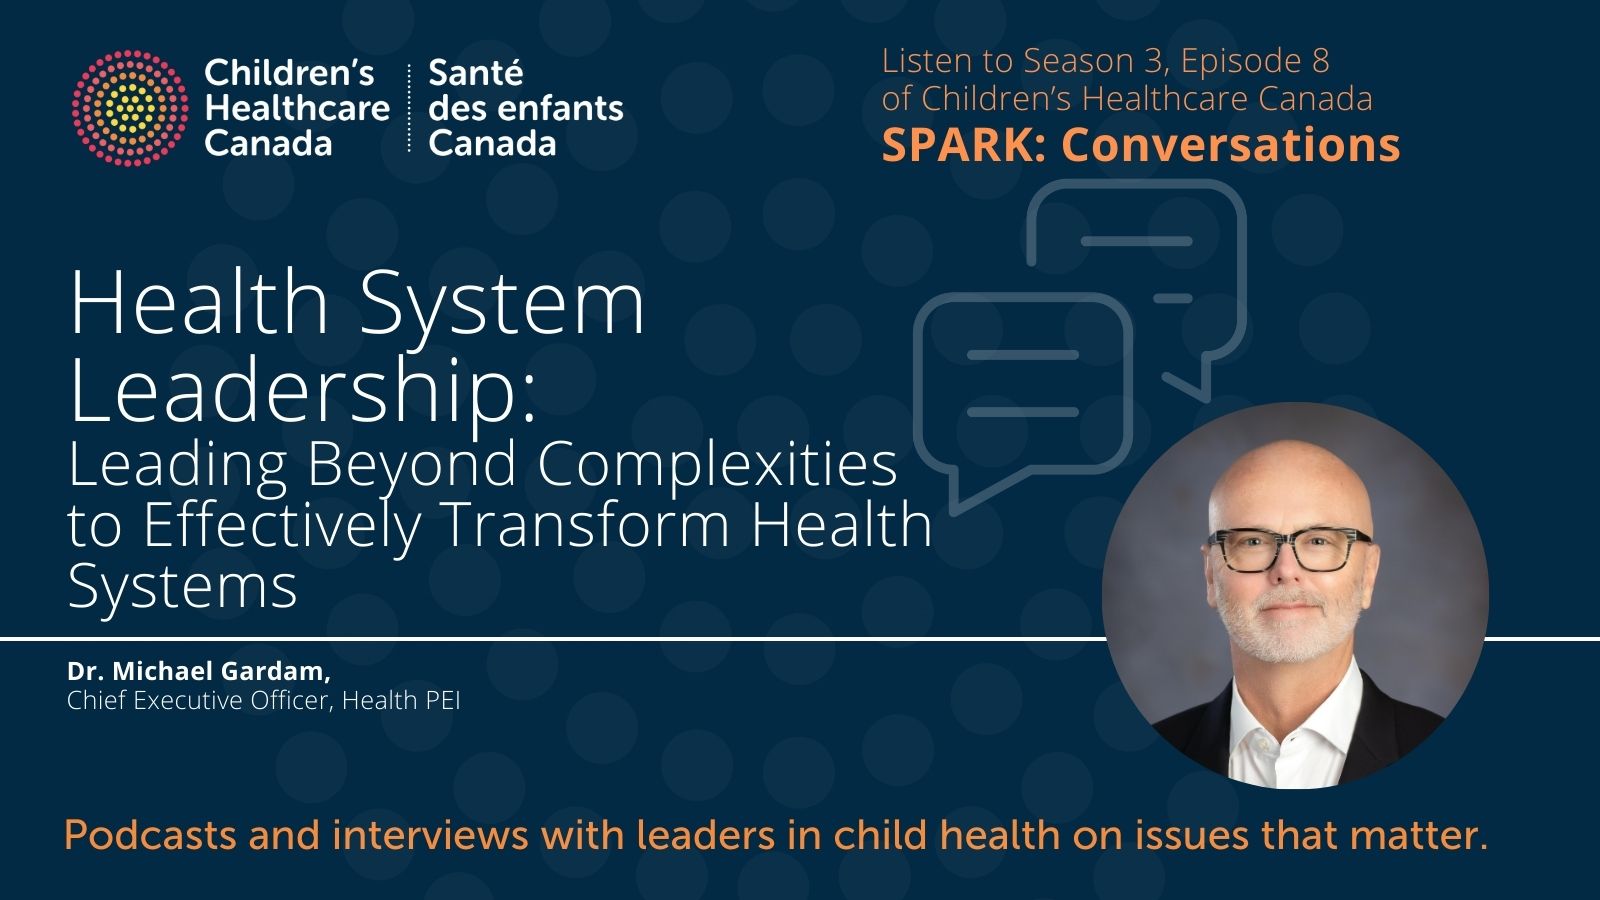 Health System Leadership: Leading Beyond Complexities to Effectively Transform Health Systems